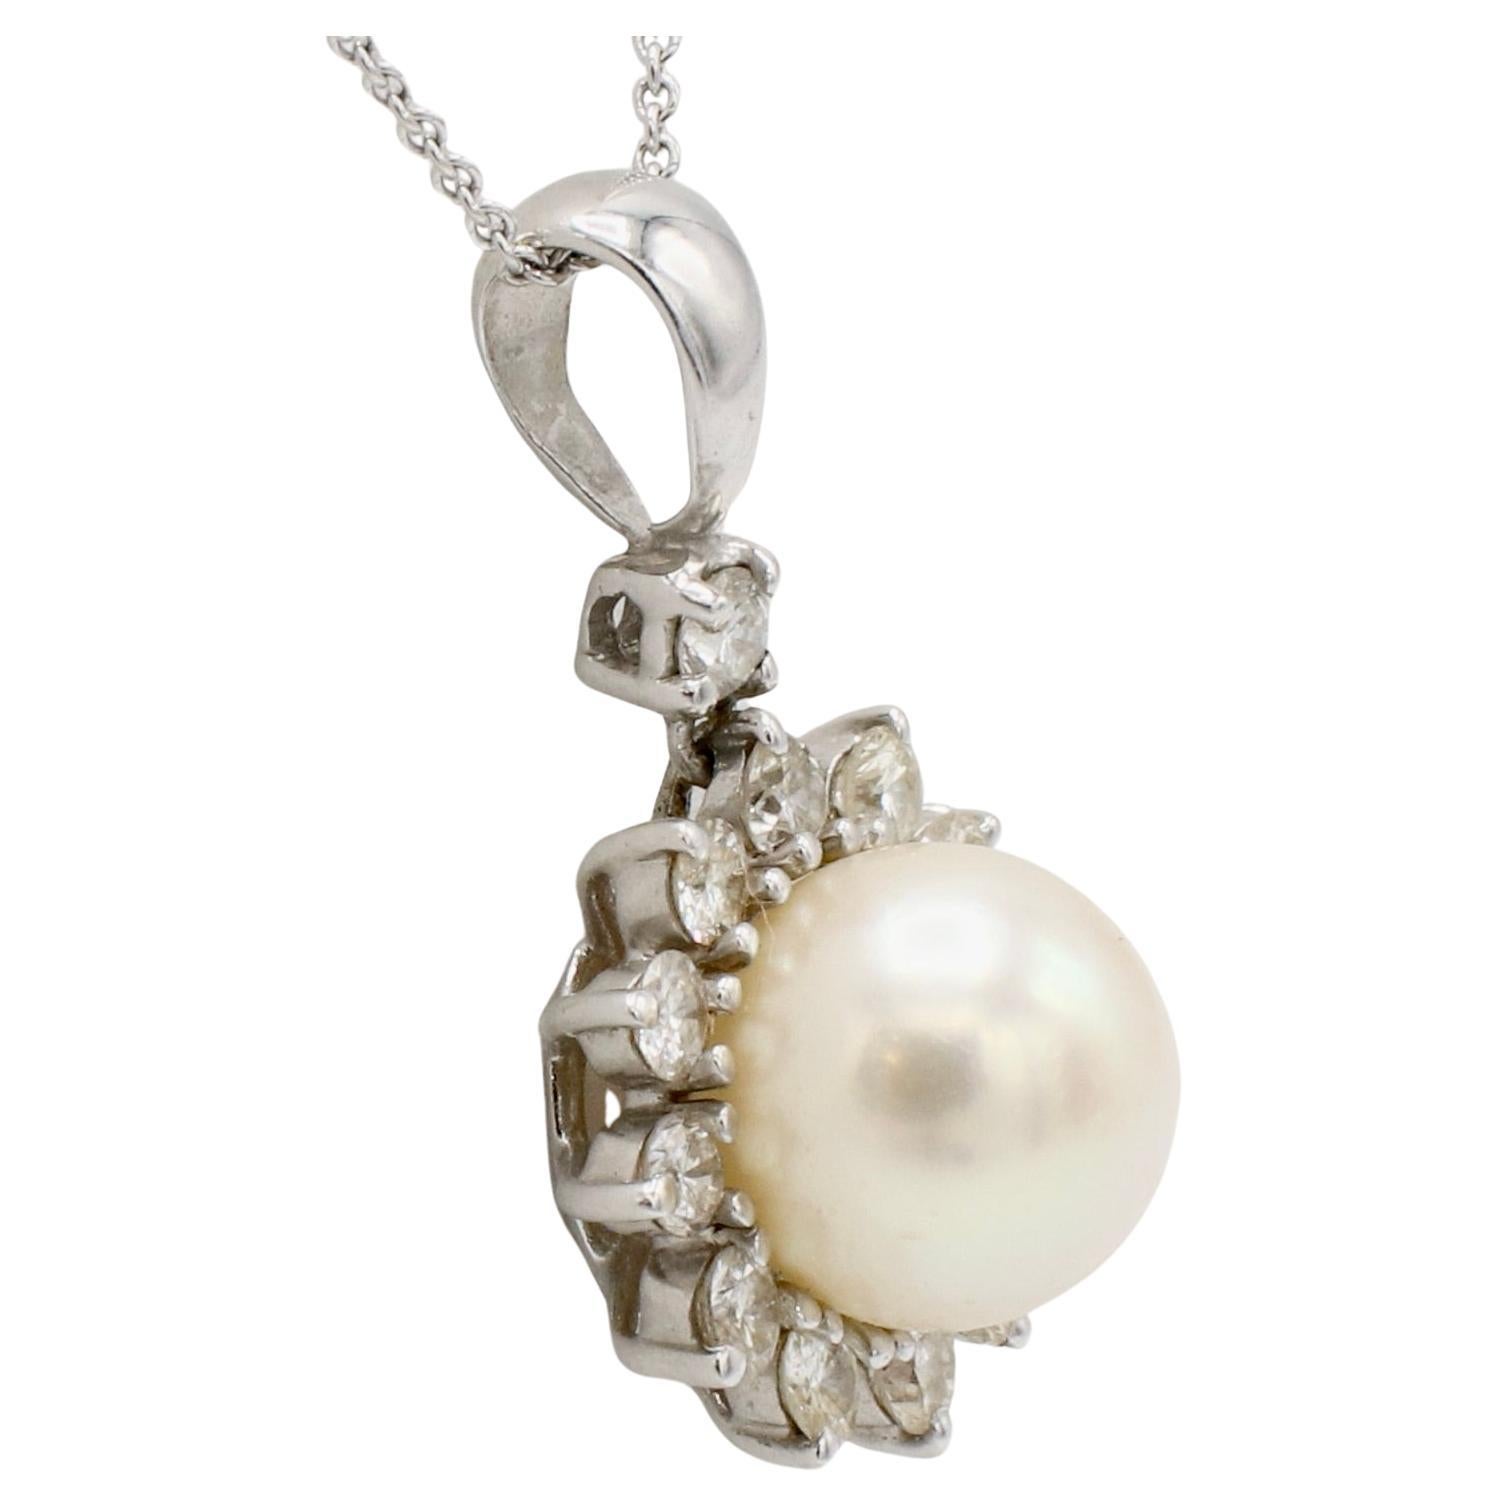 White Gold Cultured Pearl & Natural Diamond Drop Pendant Necklace
Metal: 14k & 18k white gold
Chain: 18k, 18 inches
Pearl: 9mm cultured pearl
Diamonds: Approx. 0.65 CTW G VS round natural diamonds
Drop: 14K, 24mm
Bale opening: 3.5mm
Weight: 5.2